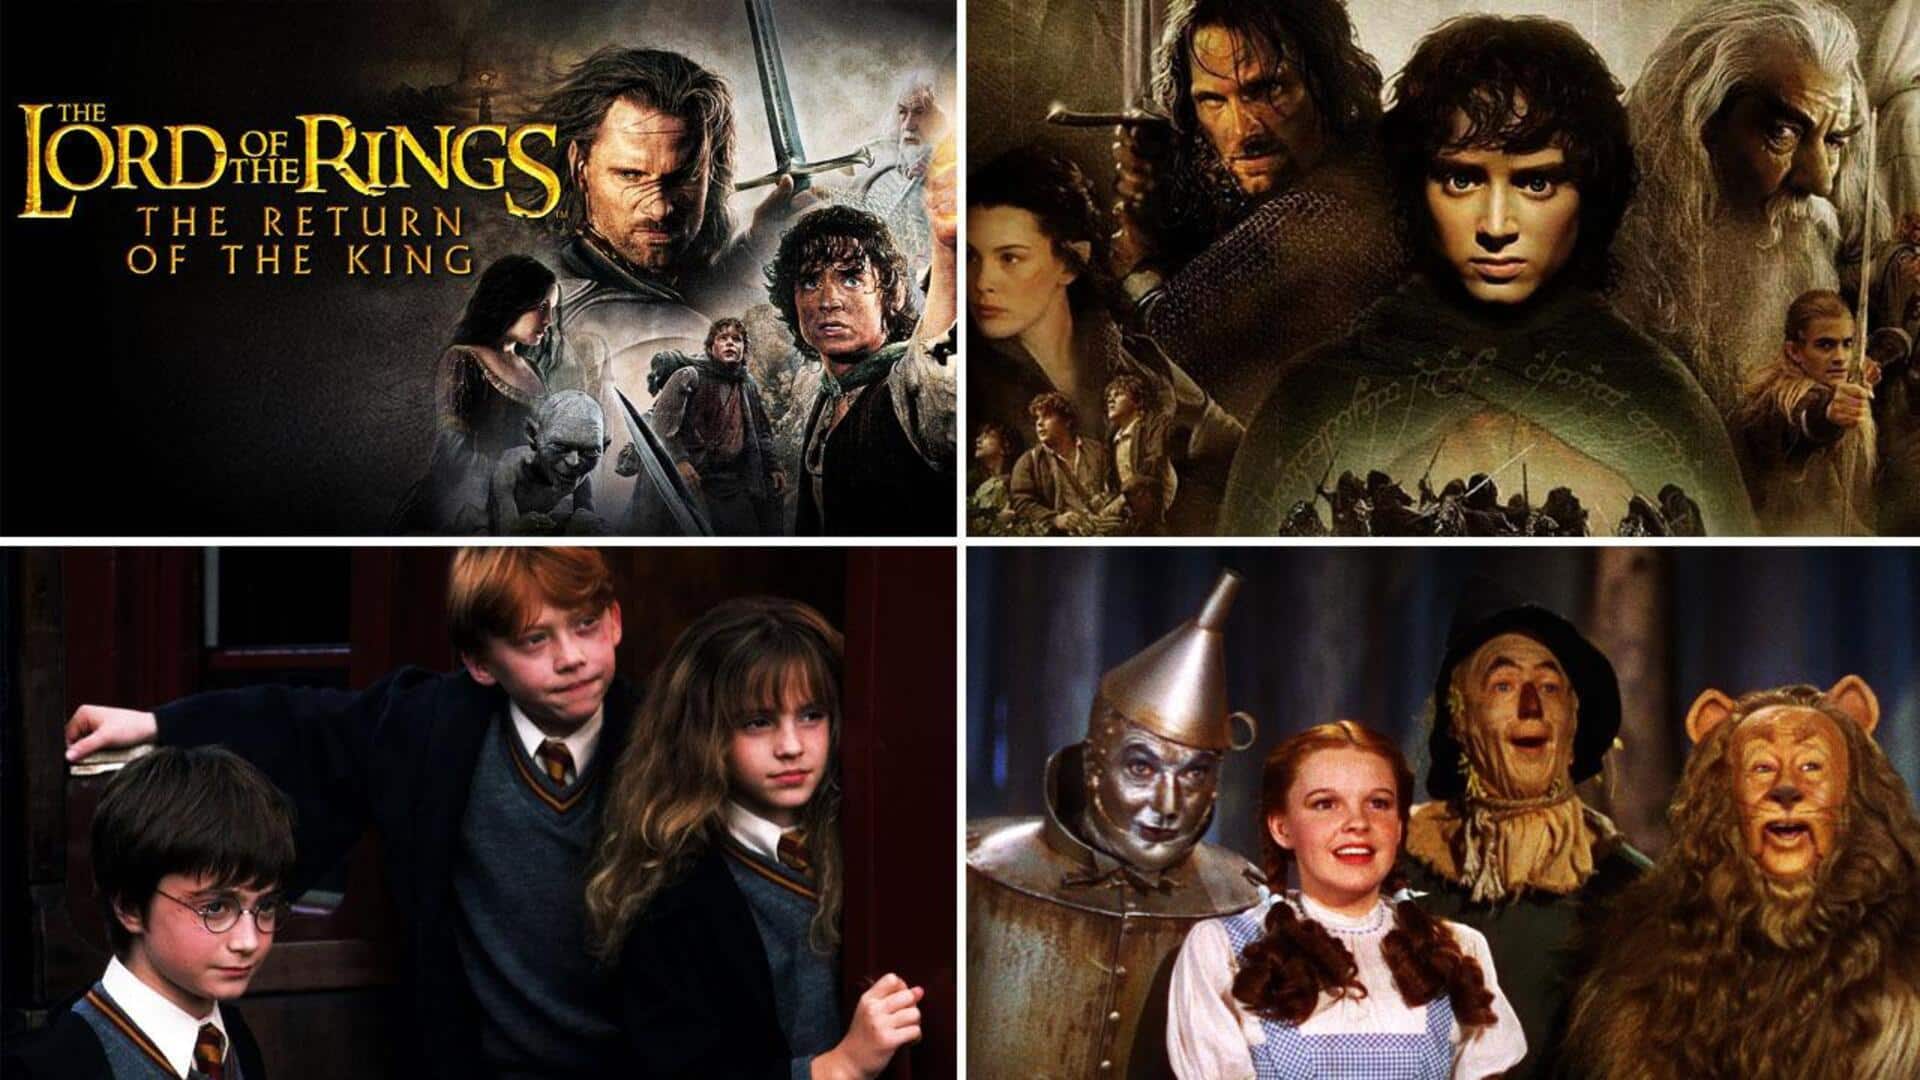 'Harry Potter' to 'LOTR': Best IMDb-rated fantasy movies